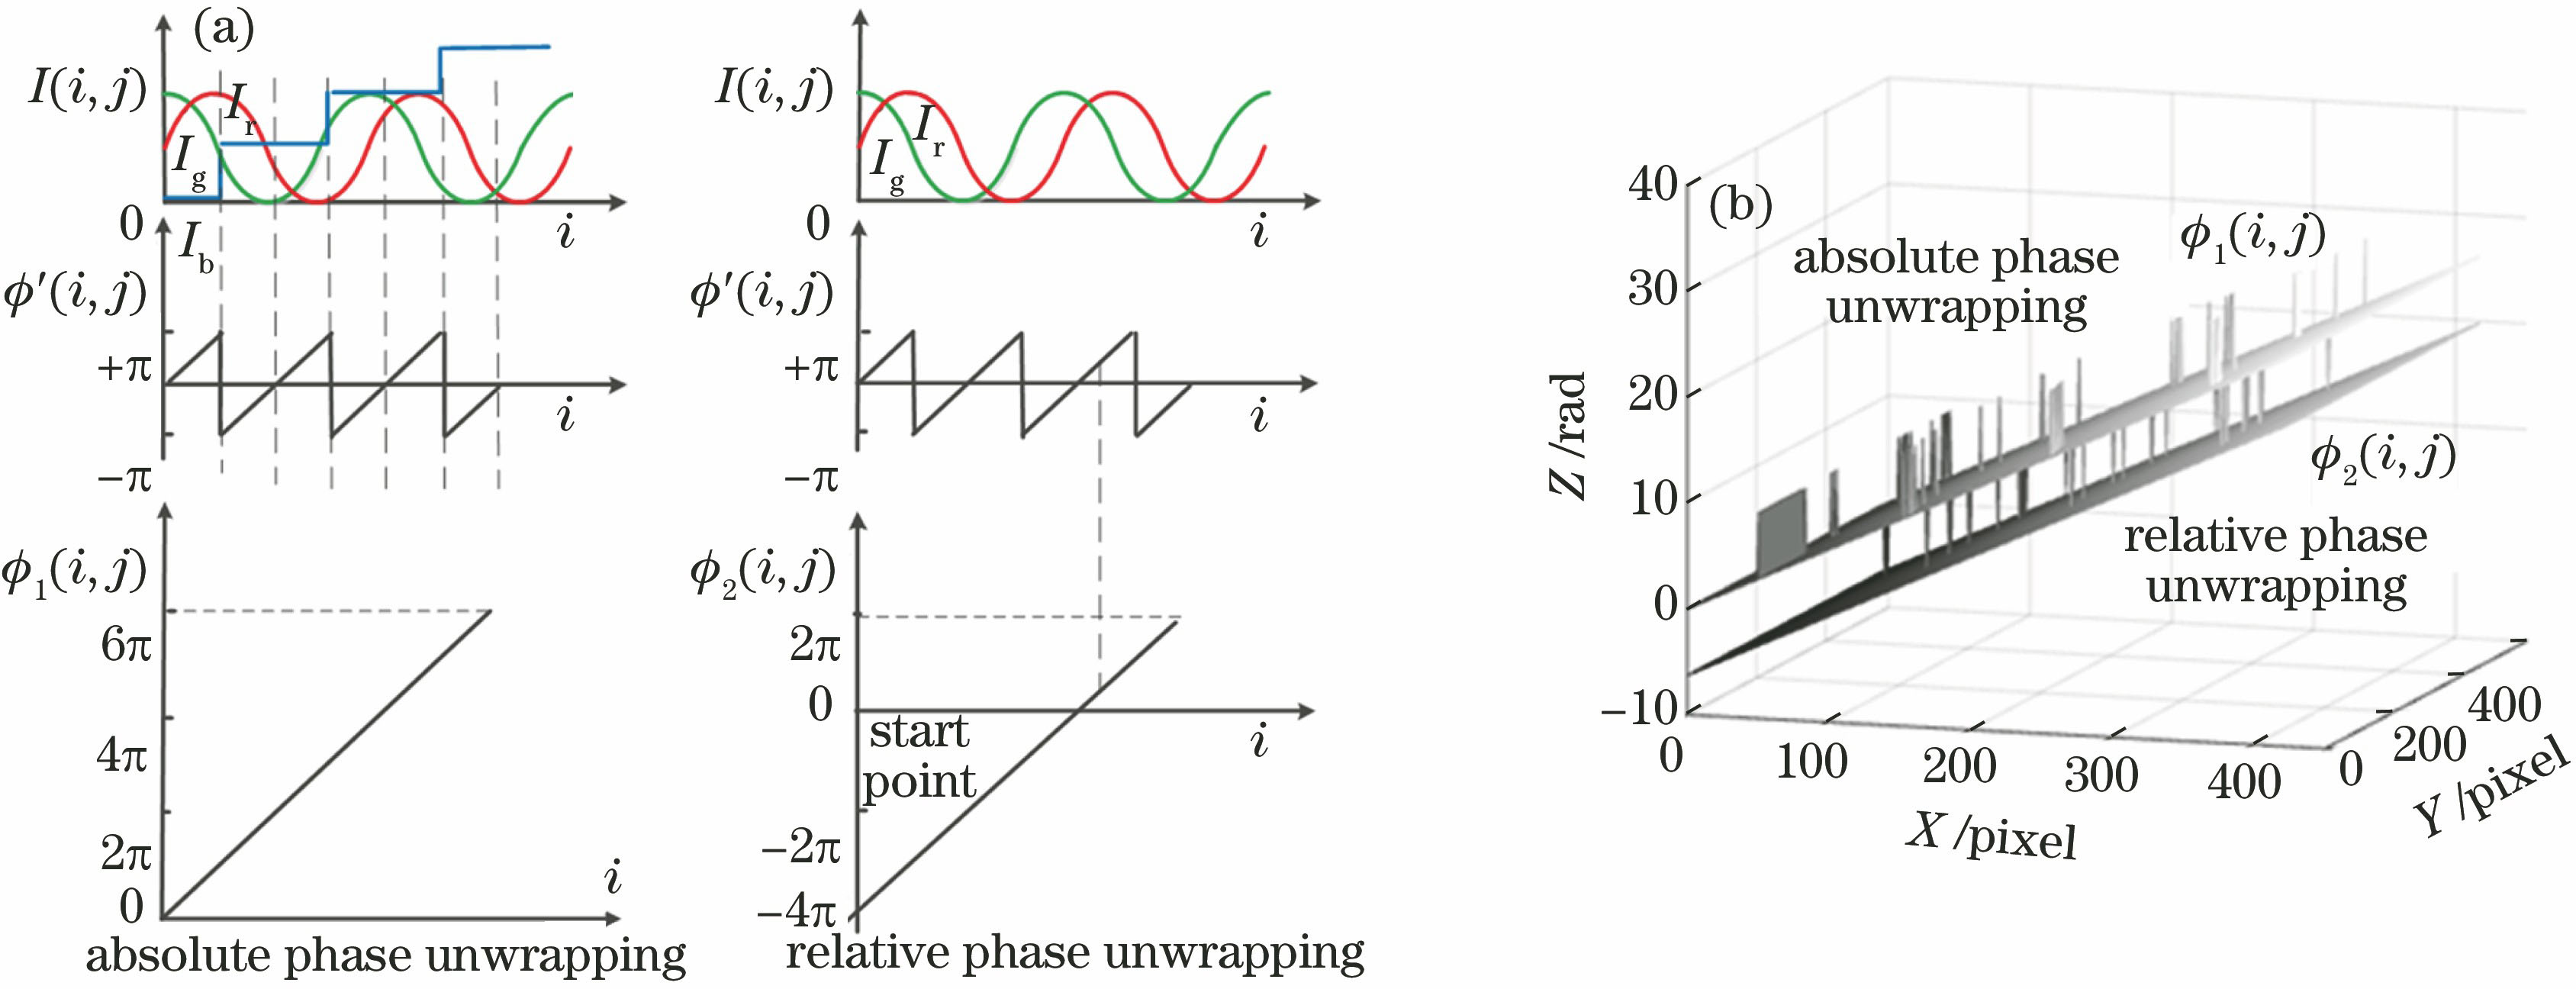 Comparison of relative and absolute phase unwrapping. (a) Principles of absolute and relative phase unwrapping; (b) relative and absolute phase unwrapping results